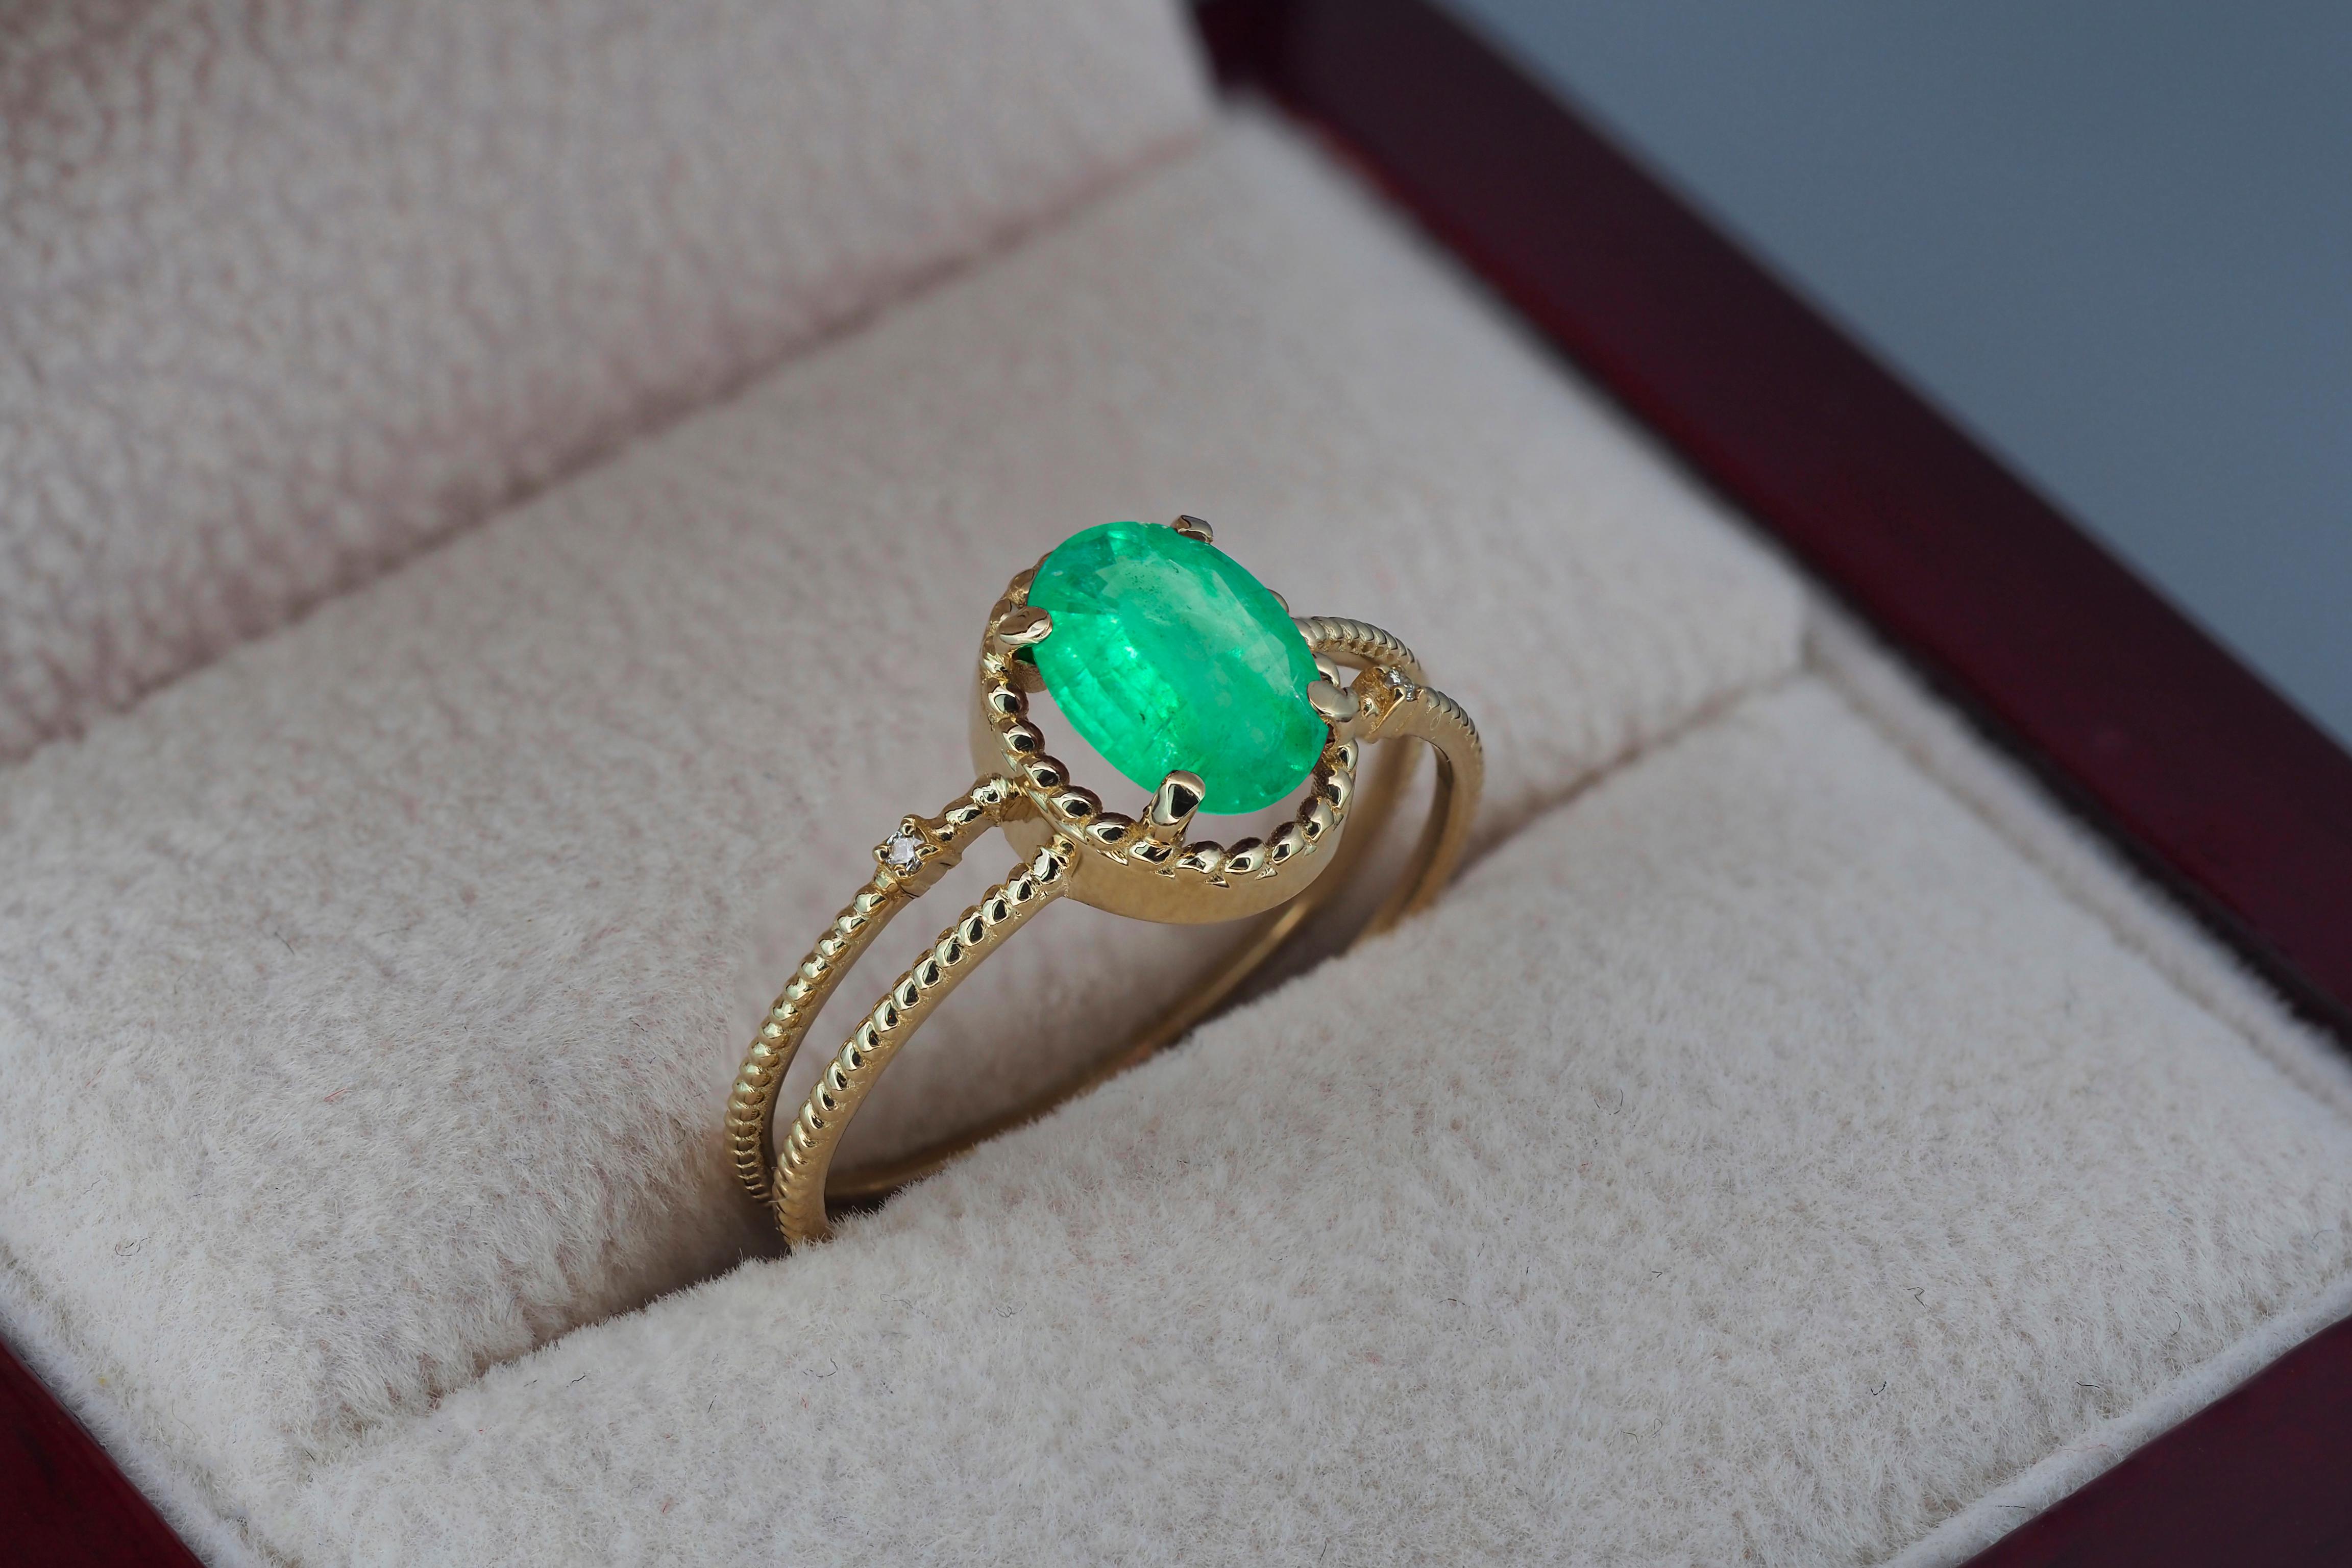 For Sale:  Emerald Gold Ring, Oval Emerald Ring, 14k Gold Ring with Emerald 6